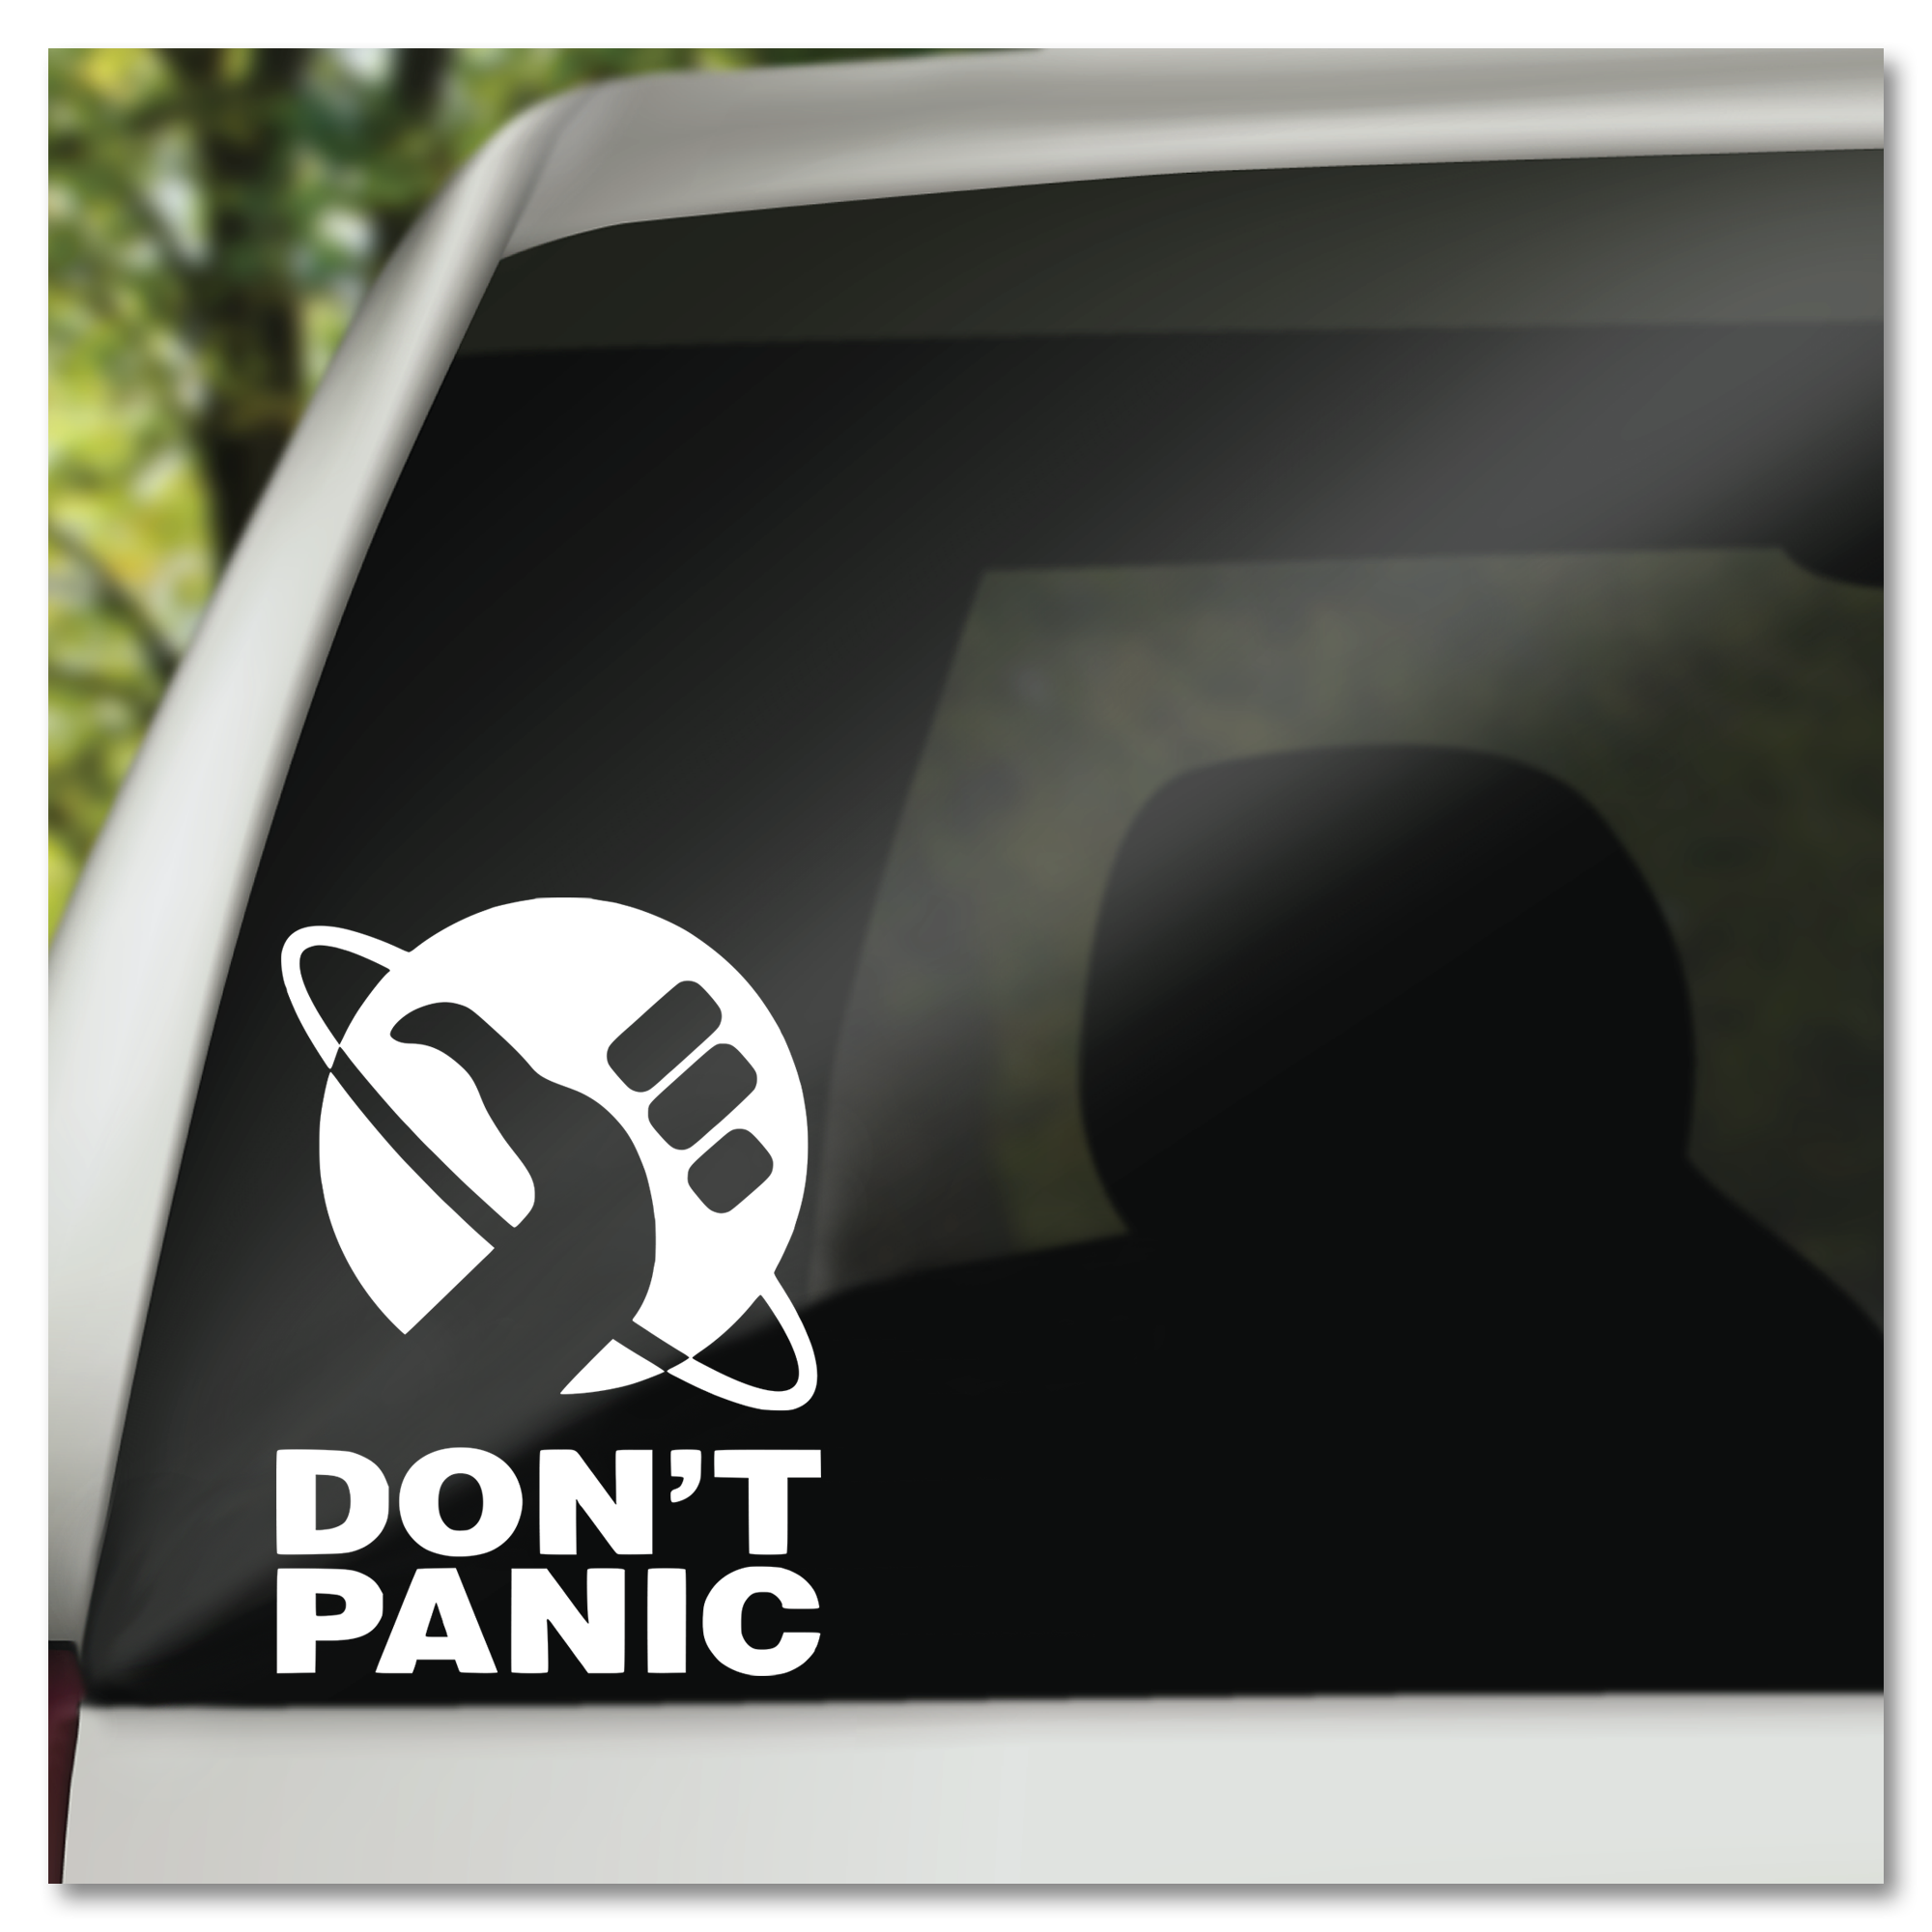 Hitchhiker's Guide to The Galaxy Don't Panic Decal Vinyl Sticker|Cars  Trucks Vans Walls Laptop| White |5.5 x 4.5 in|LLI237